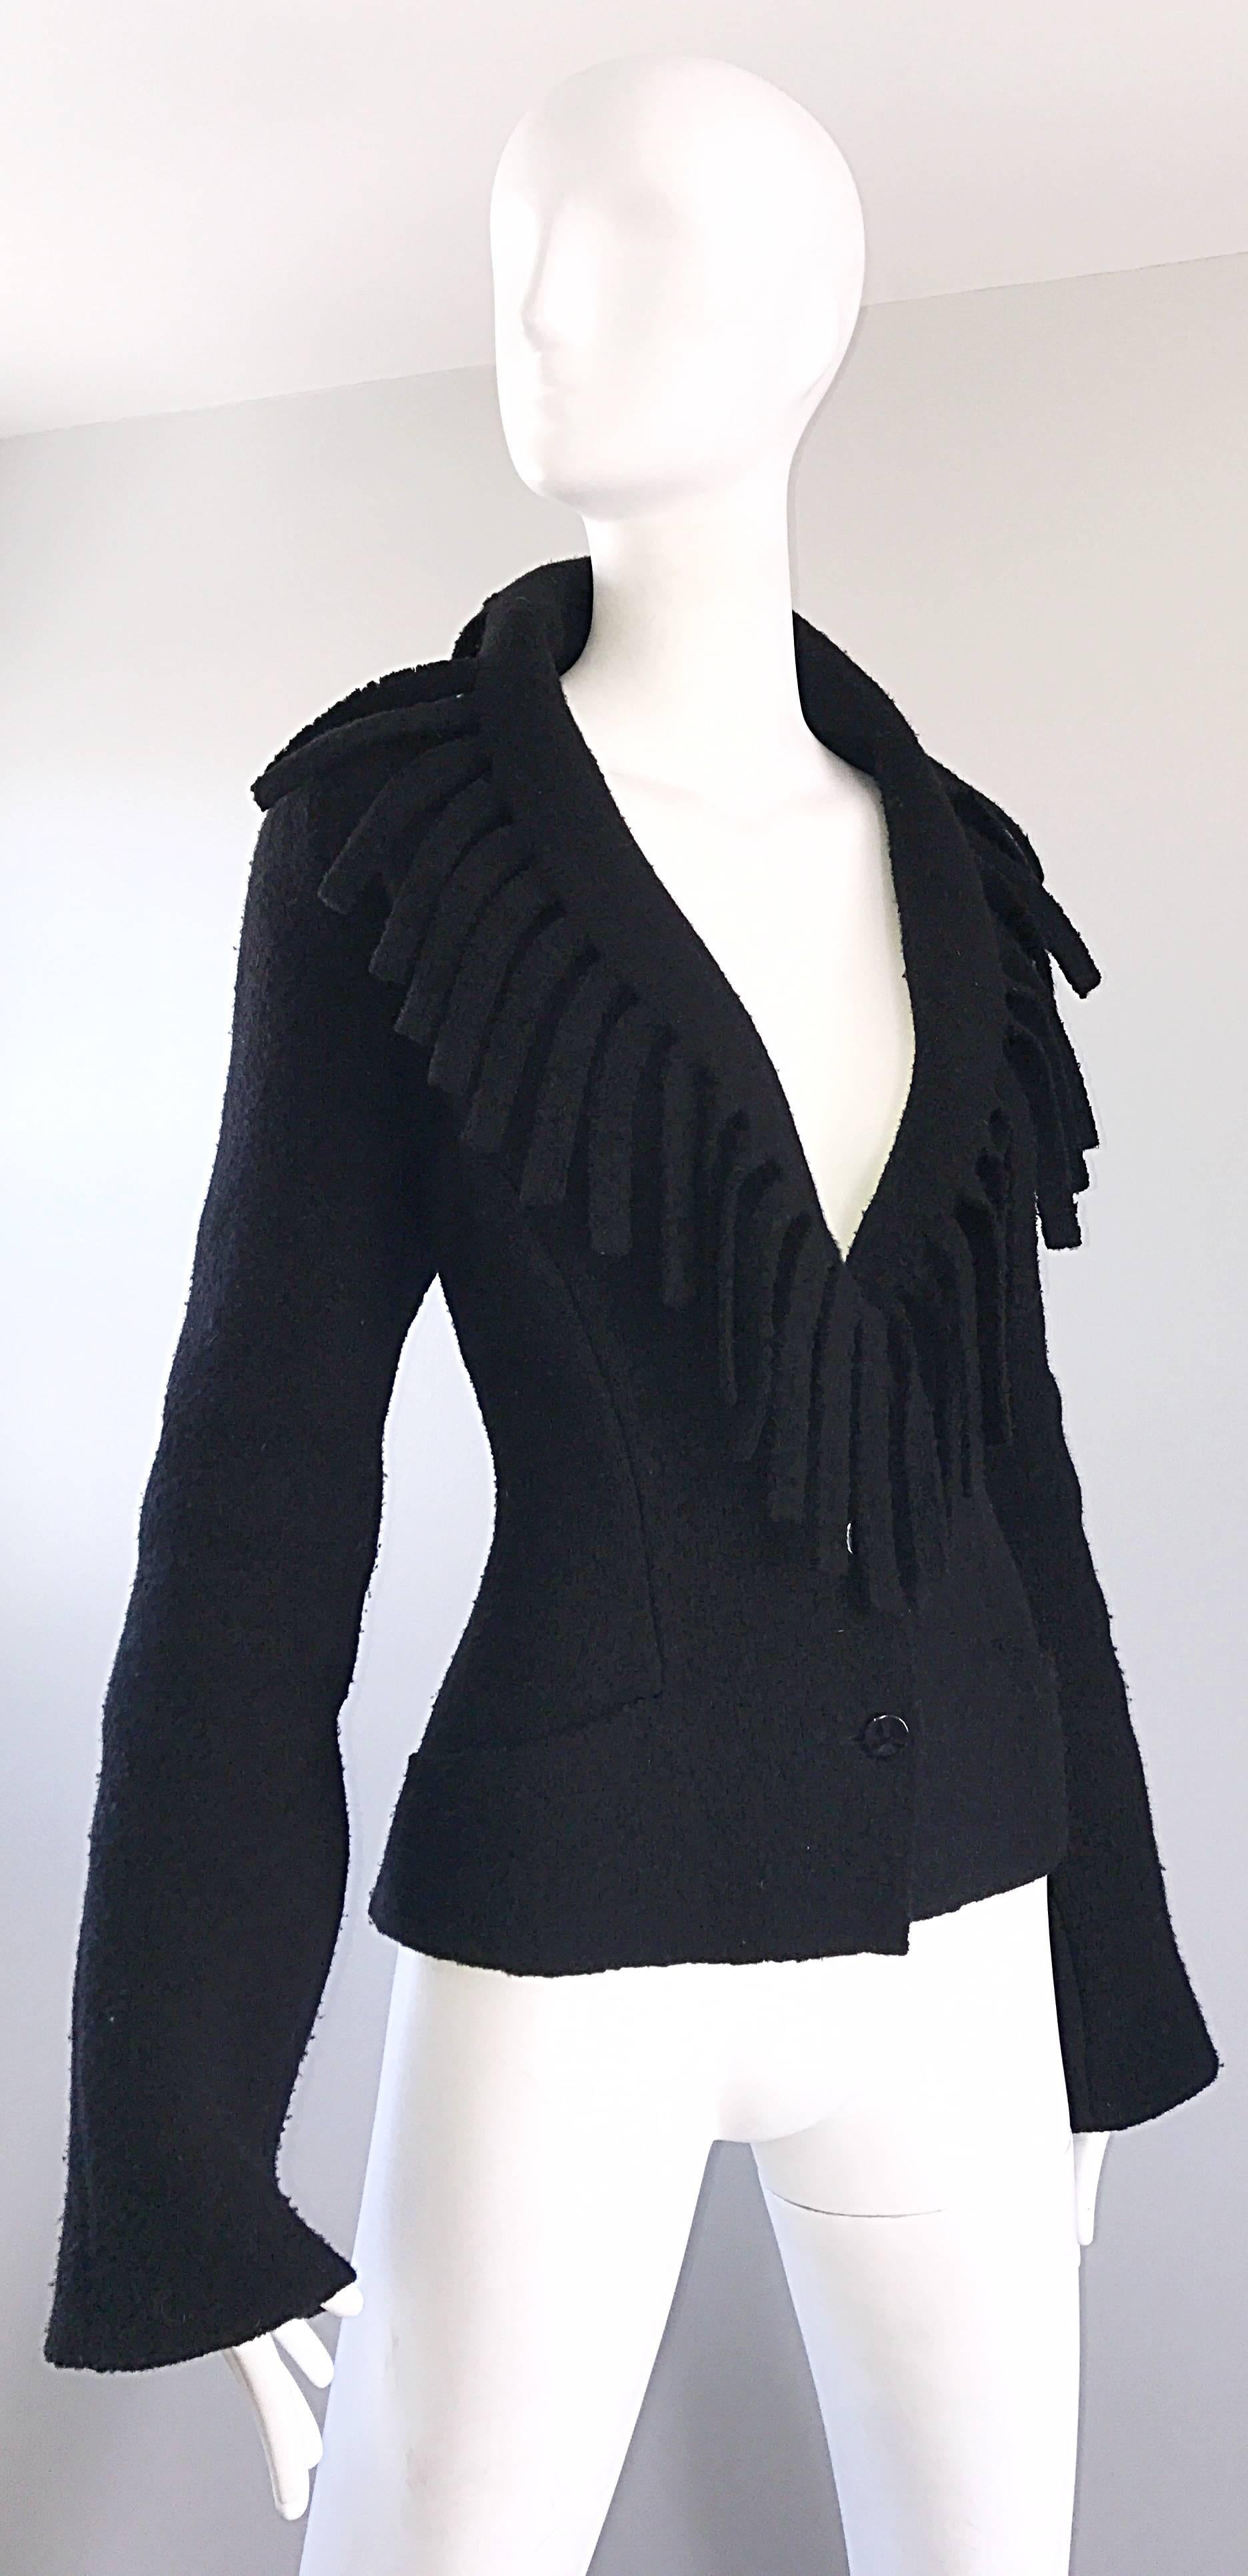 Rare vintage THIERRY MUGLER Avant Garde boiled wool knit blazer jacket! Features amazing fringe around the entire collar that hangs loosely. Buttons up the front bodice. Functional pocket at each side of the waist. Super soft comfortable boiled wool